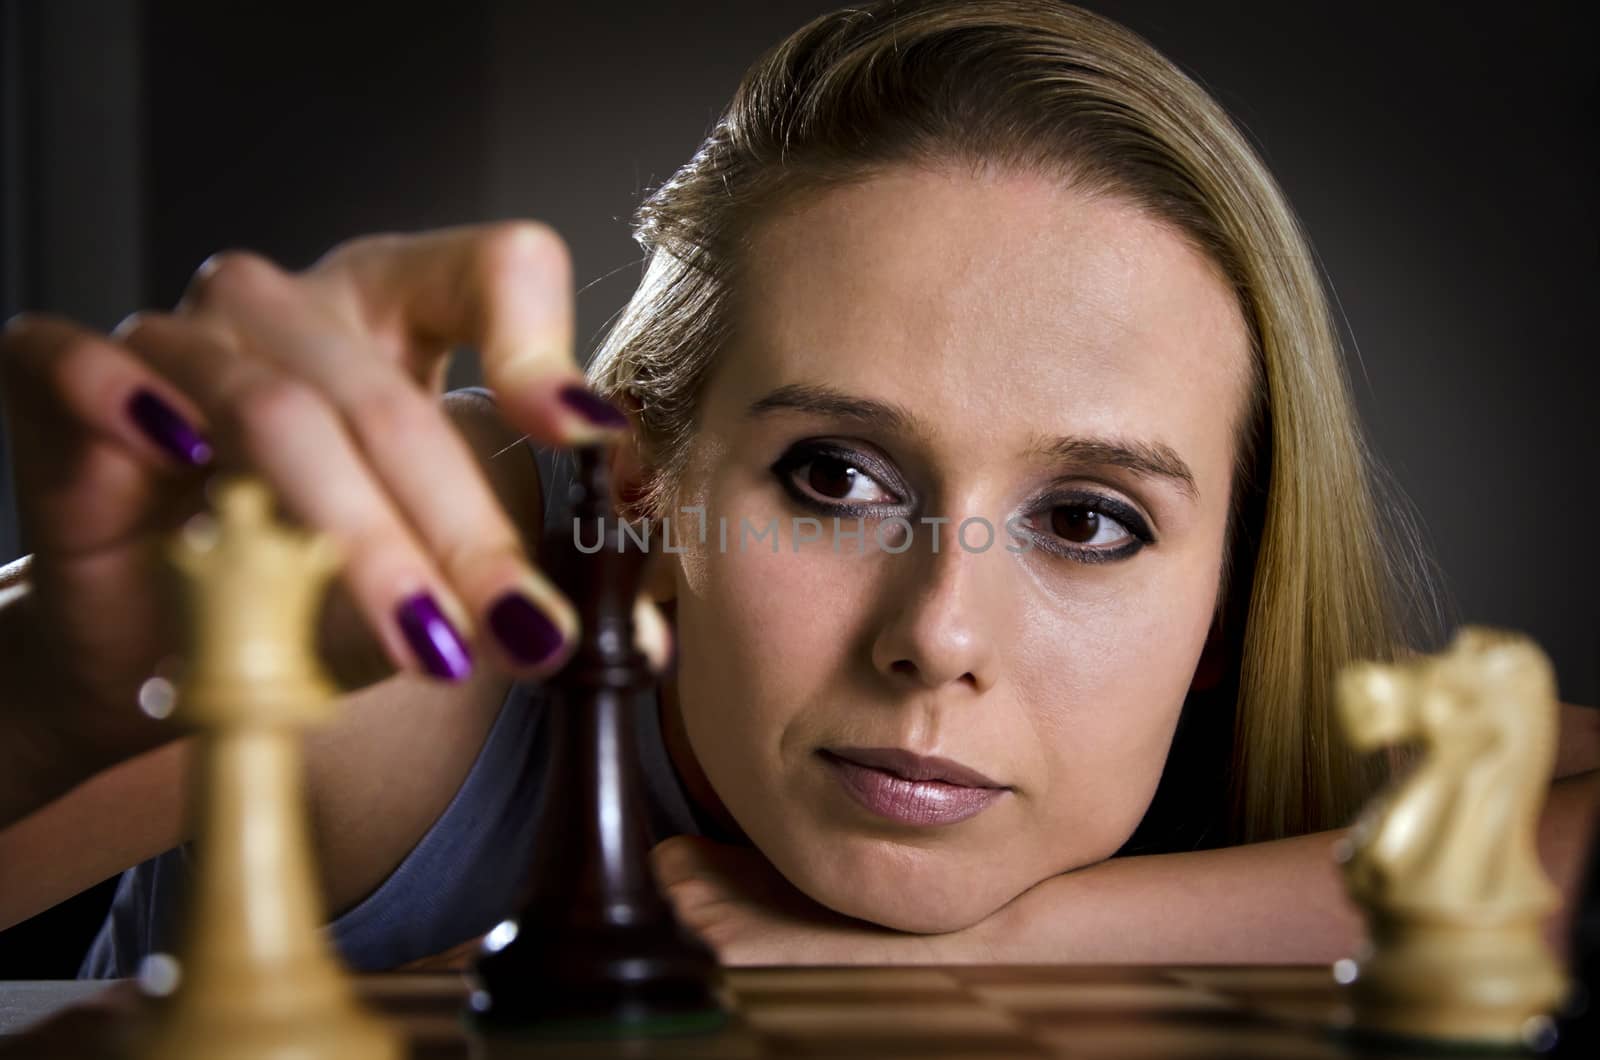 woman playing chess making her move with focus on the eyes of a woman